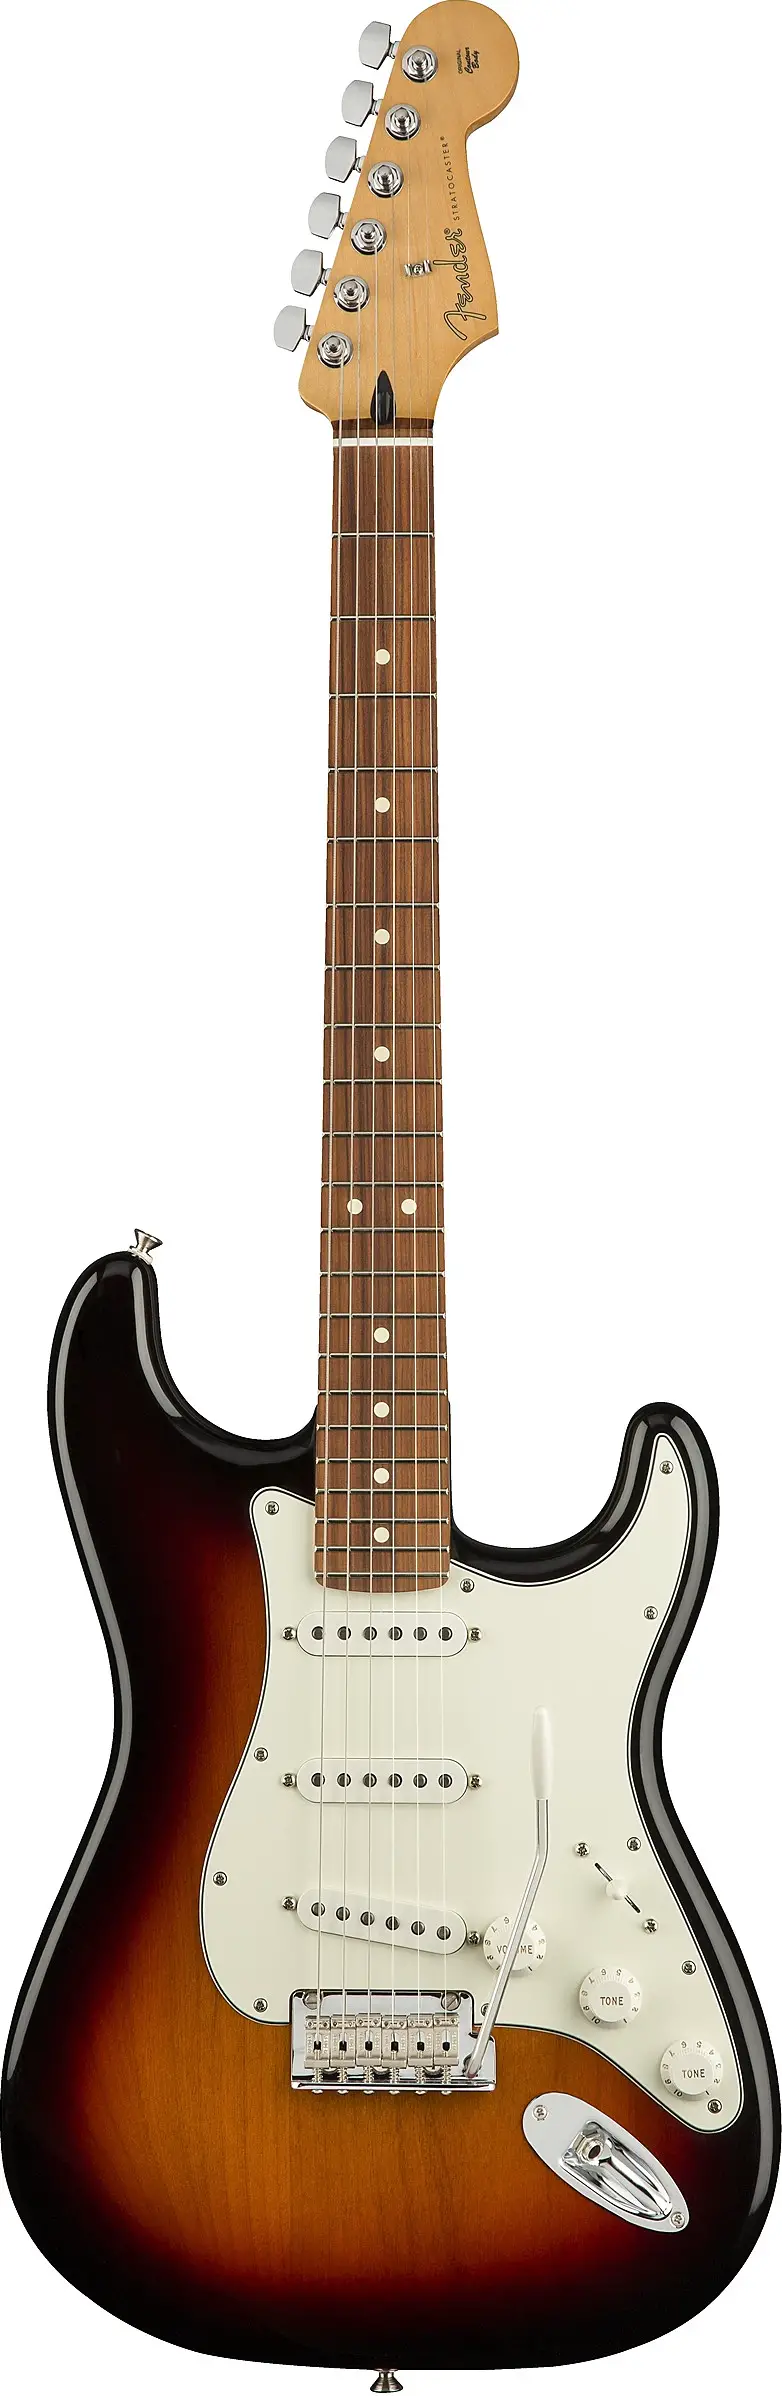 Player Stratocaster by Fender